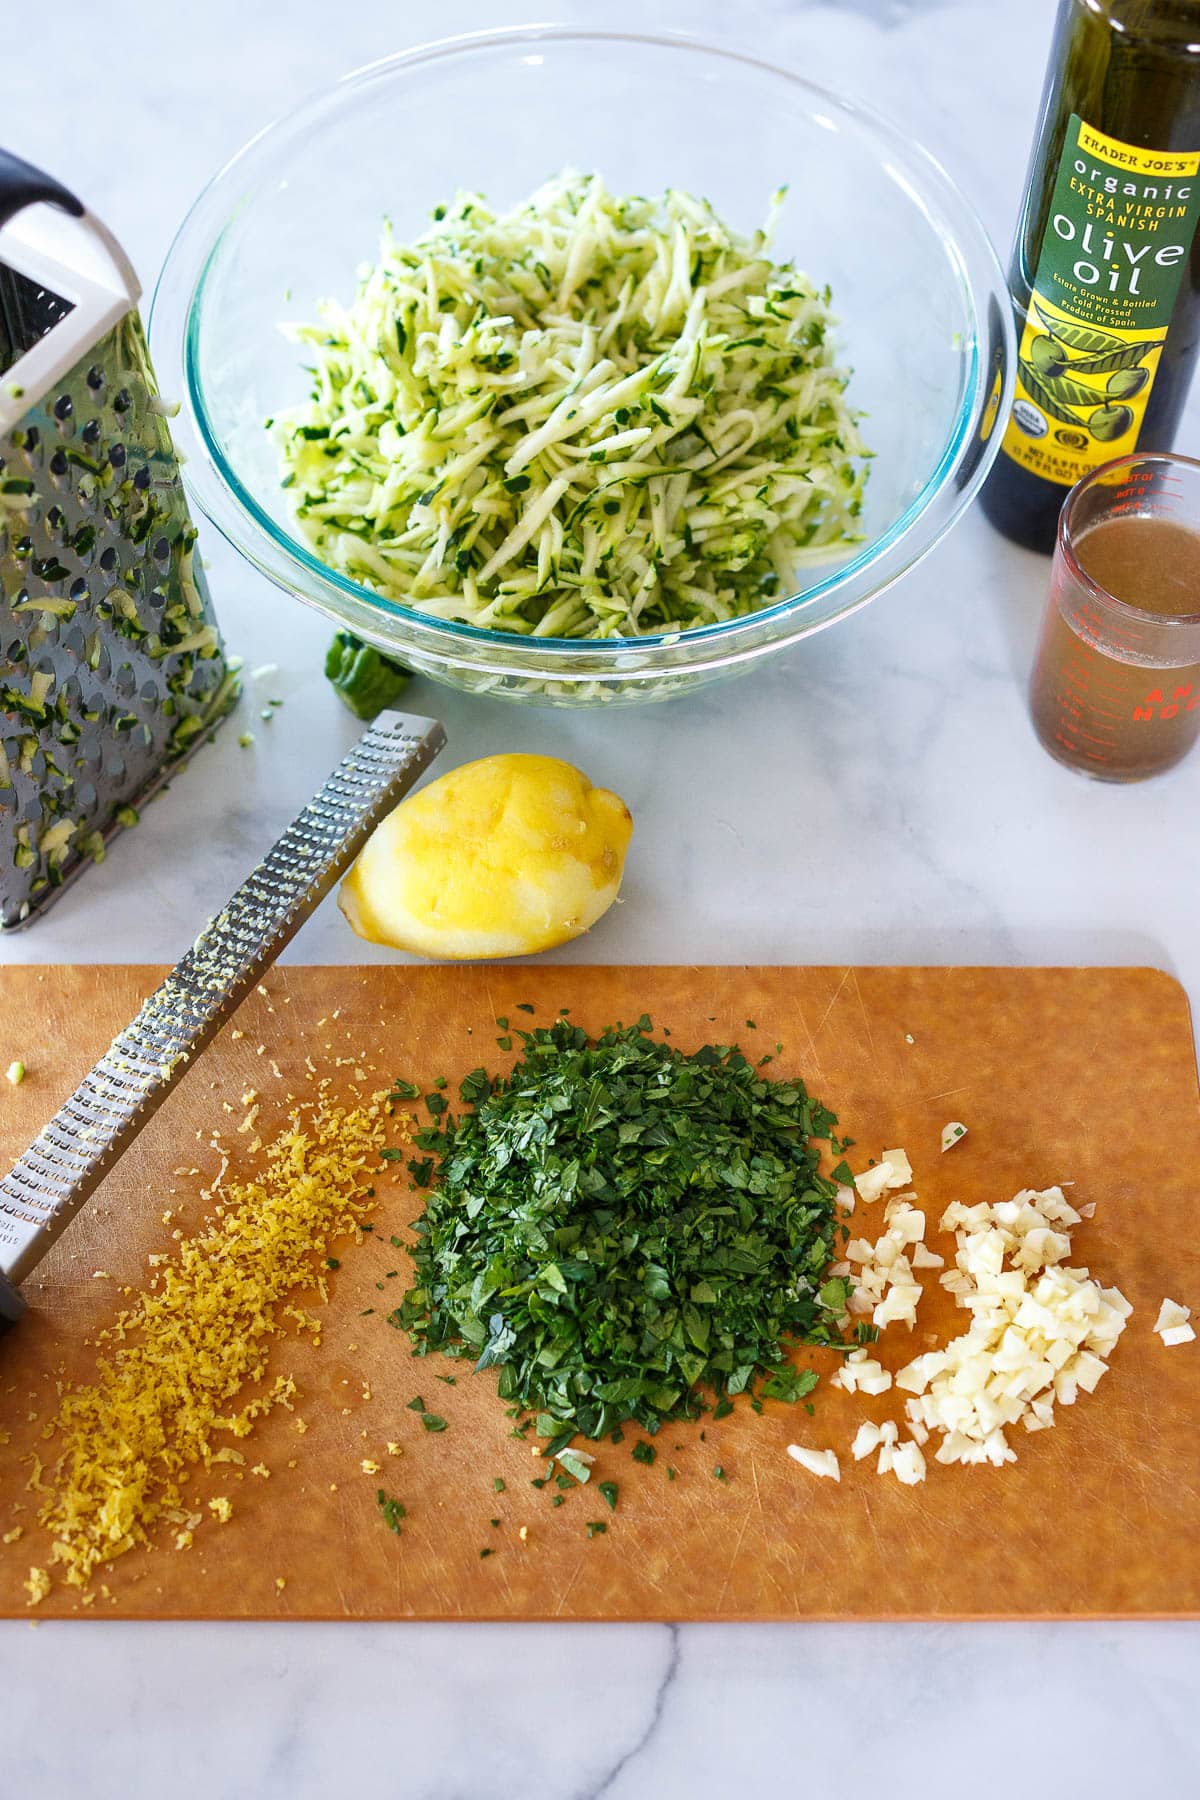 Chopped lemon zest, parsley and garlic on a cutting board with grated zucchini in a glass bowl.